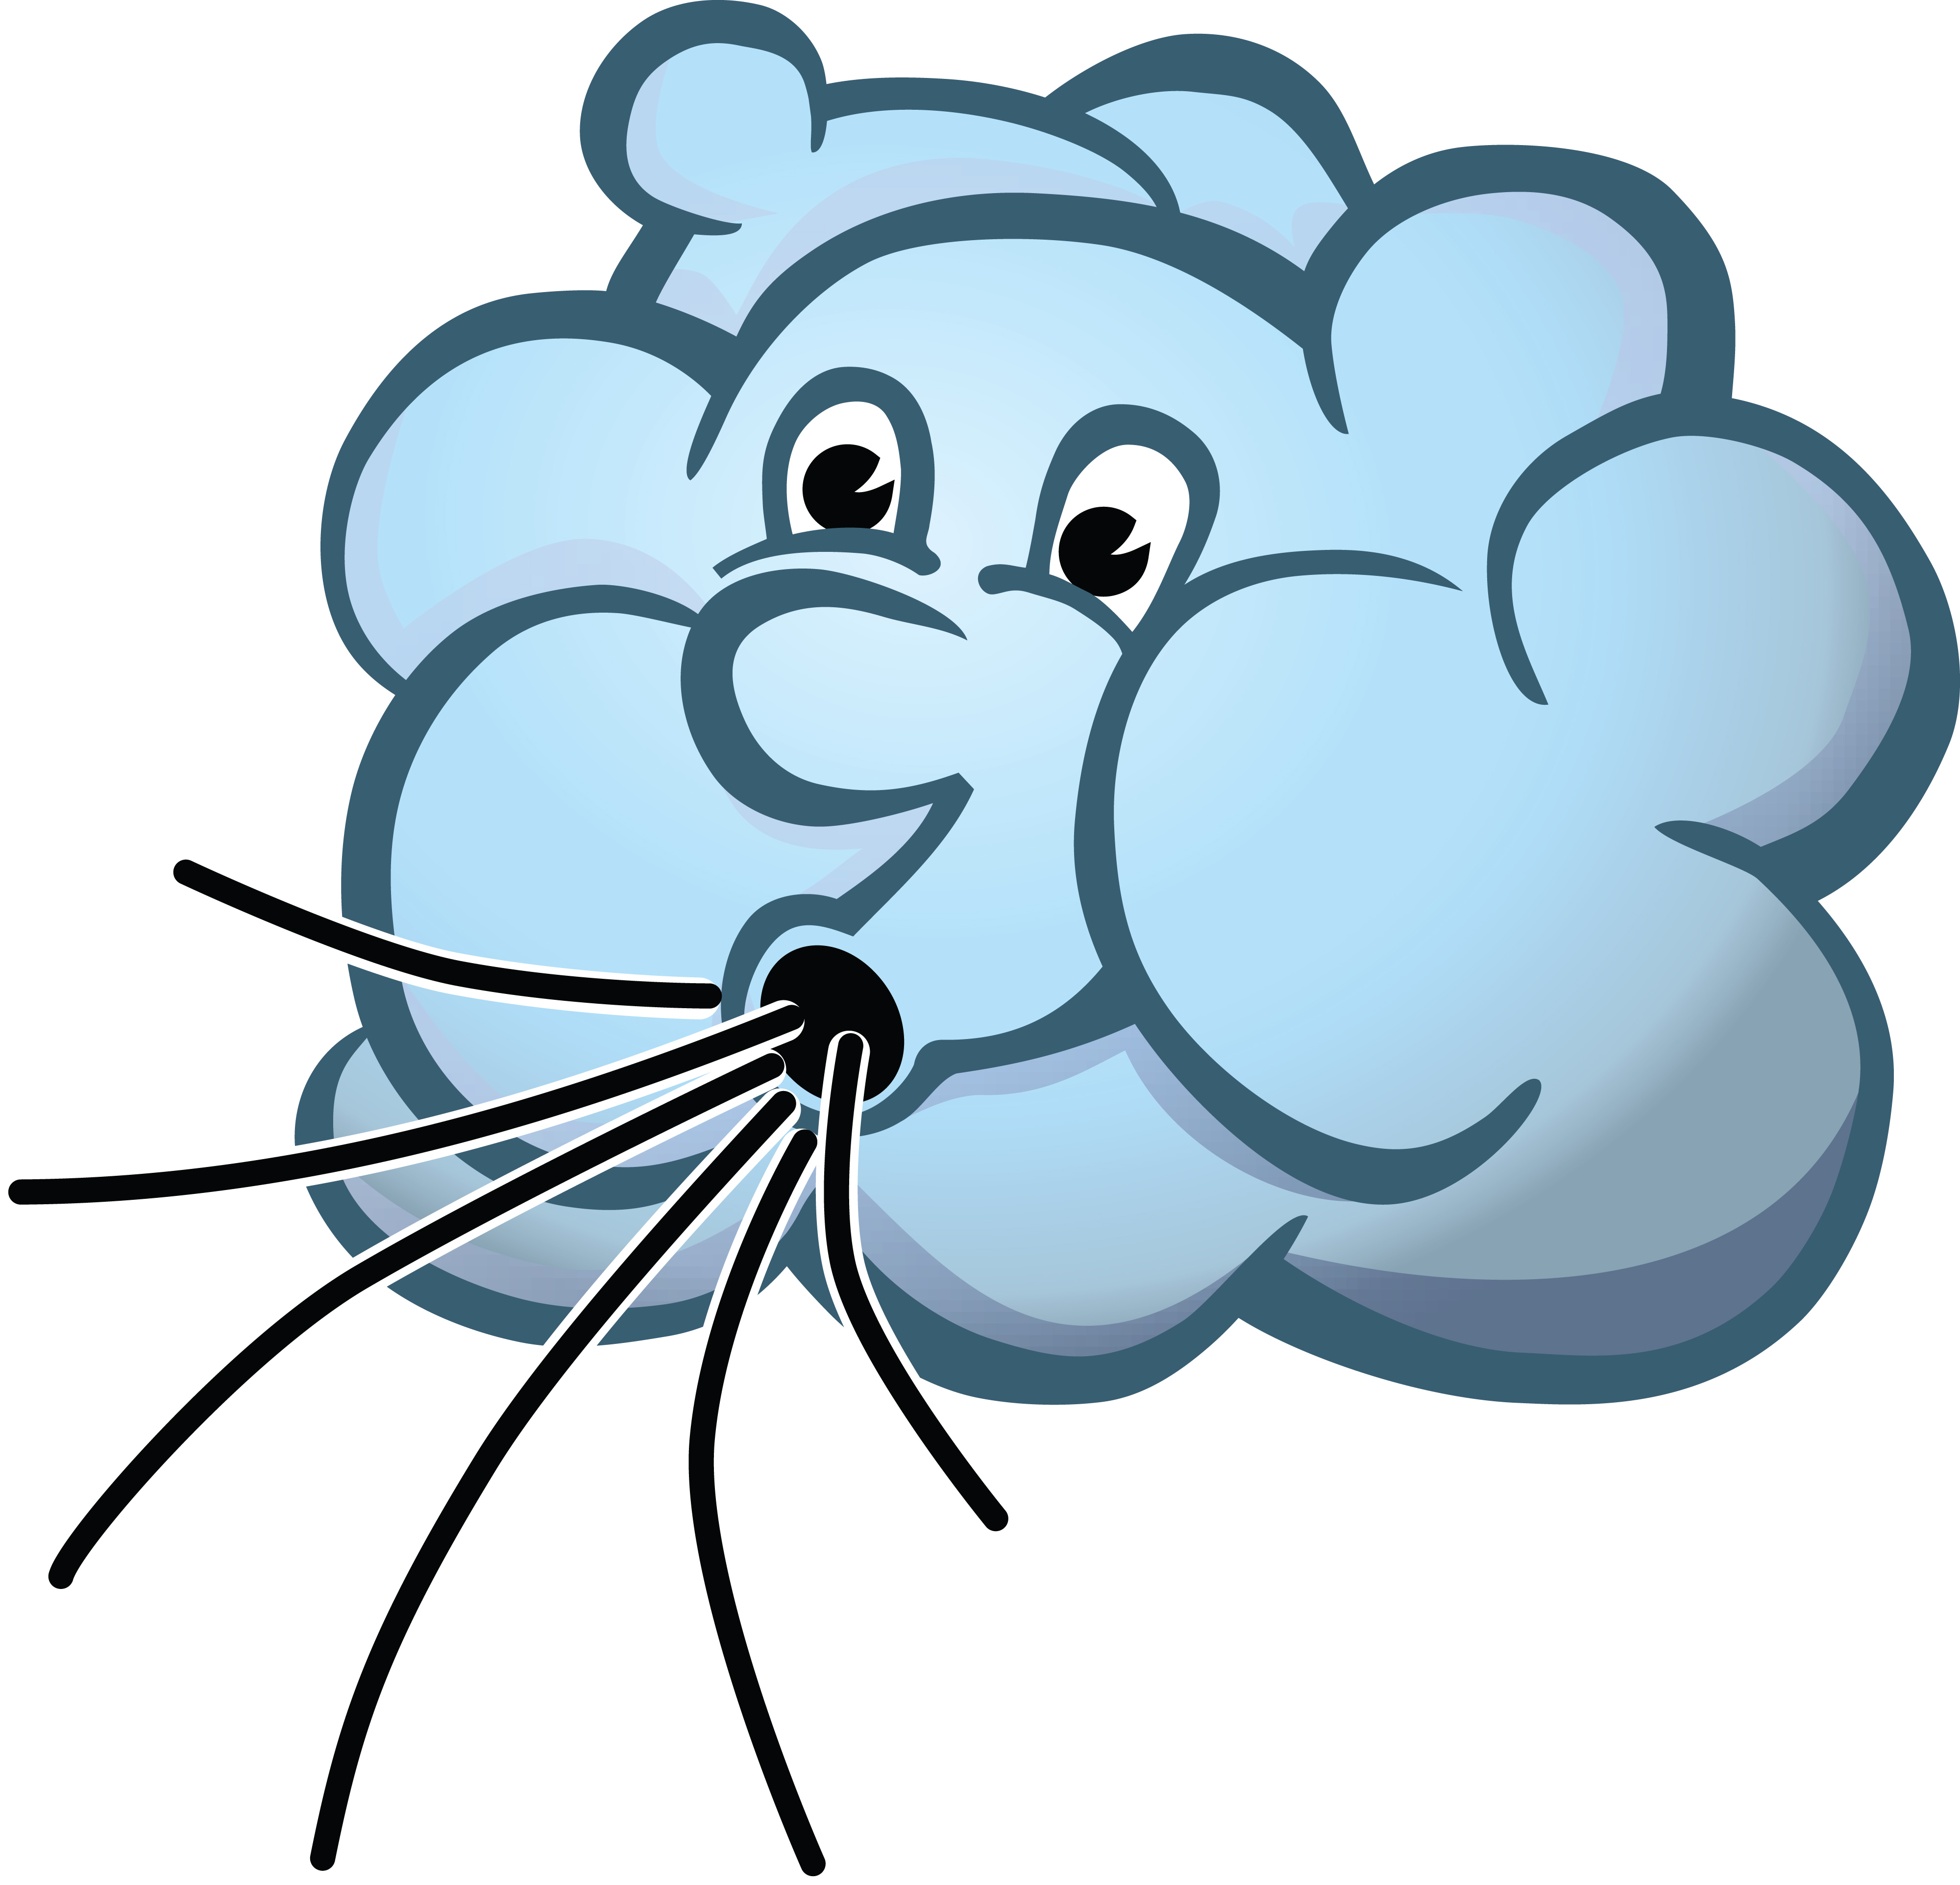 Free Clipart Of A cloud blowing wind